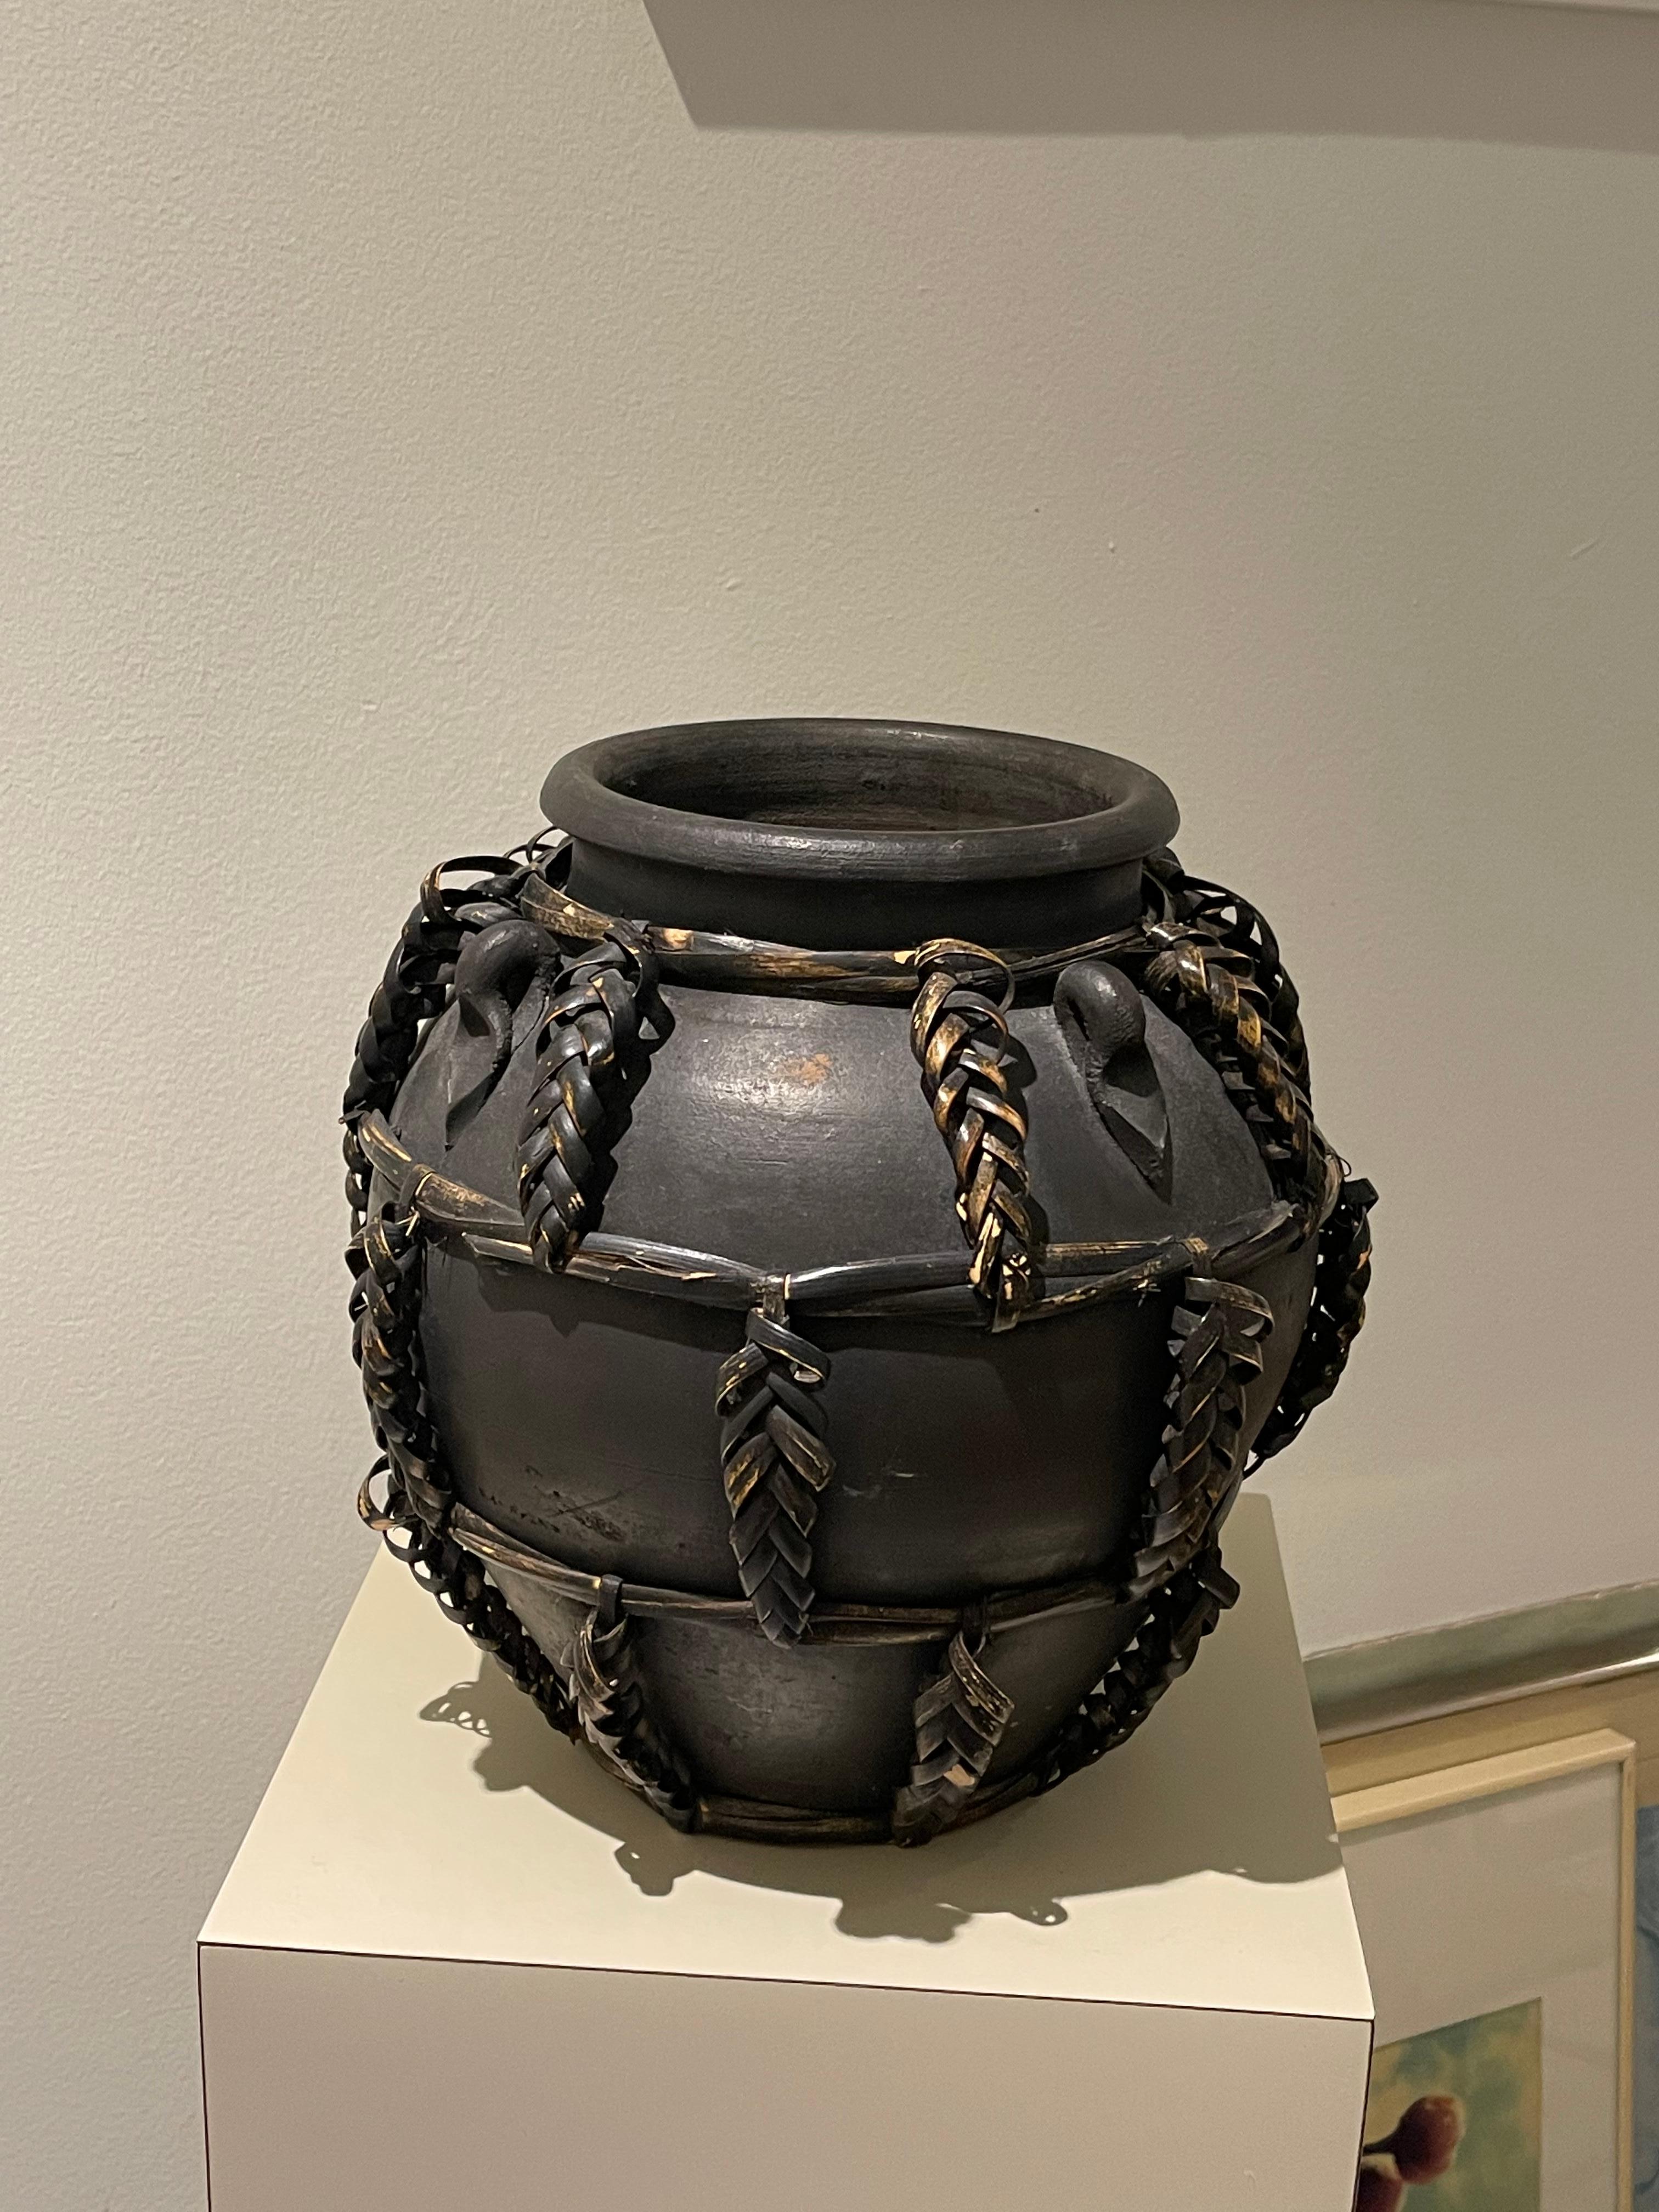 Mid 20th Century Hand Crafted Ceramic Pottery with handwoven and hand painted techniques. This piece is brilliantly painted and constructed with a unique woven design. It was painted black and offers a desirable brutalist style that acts as a great